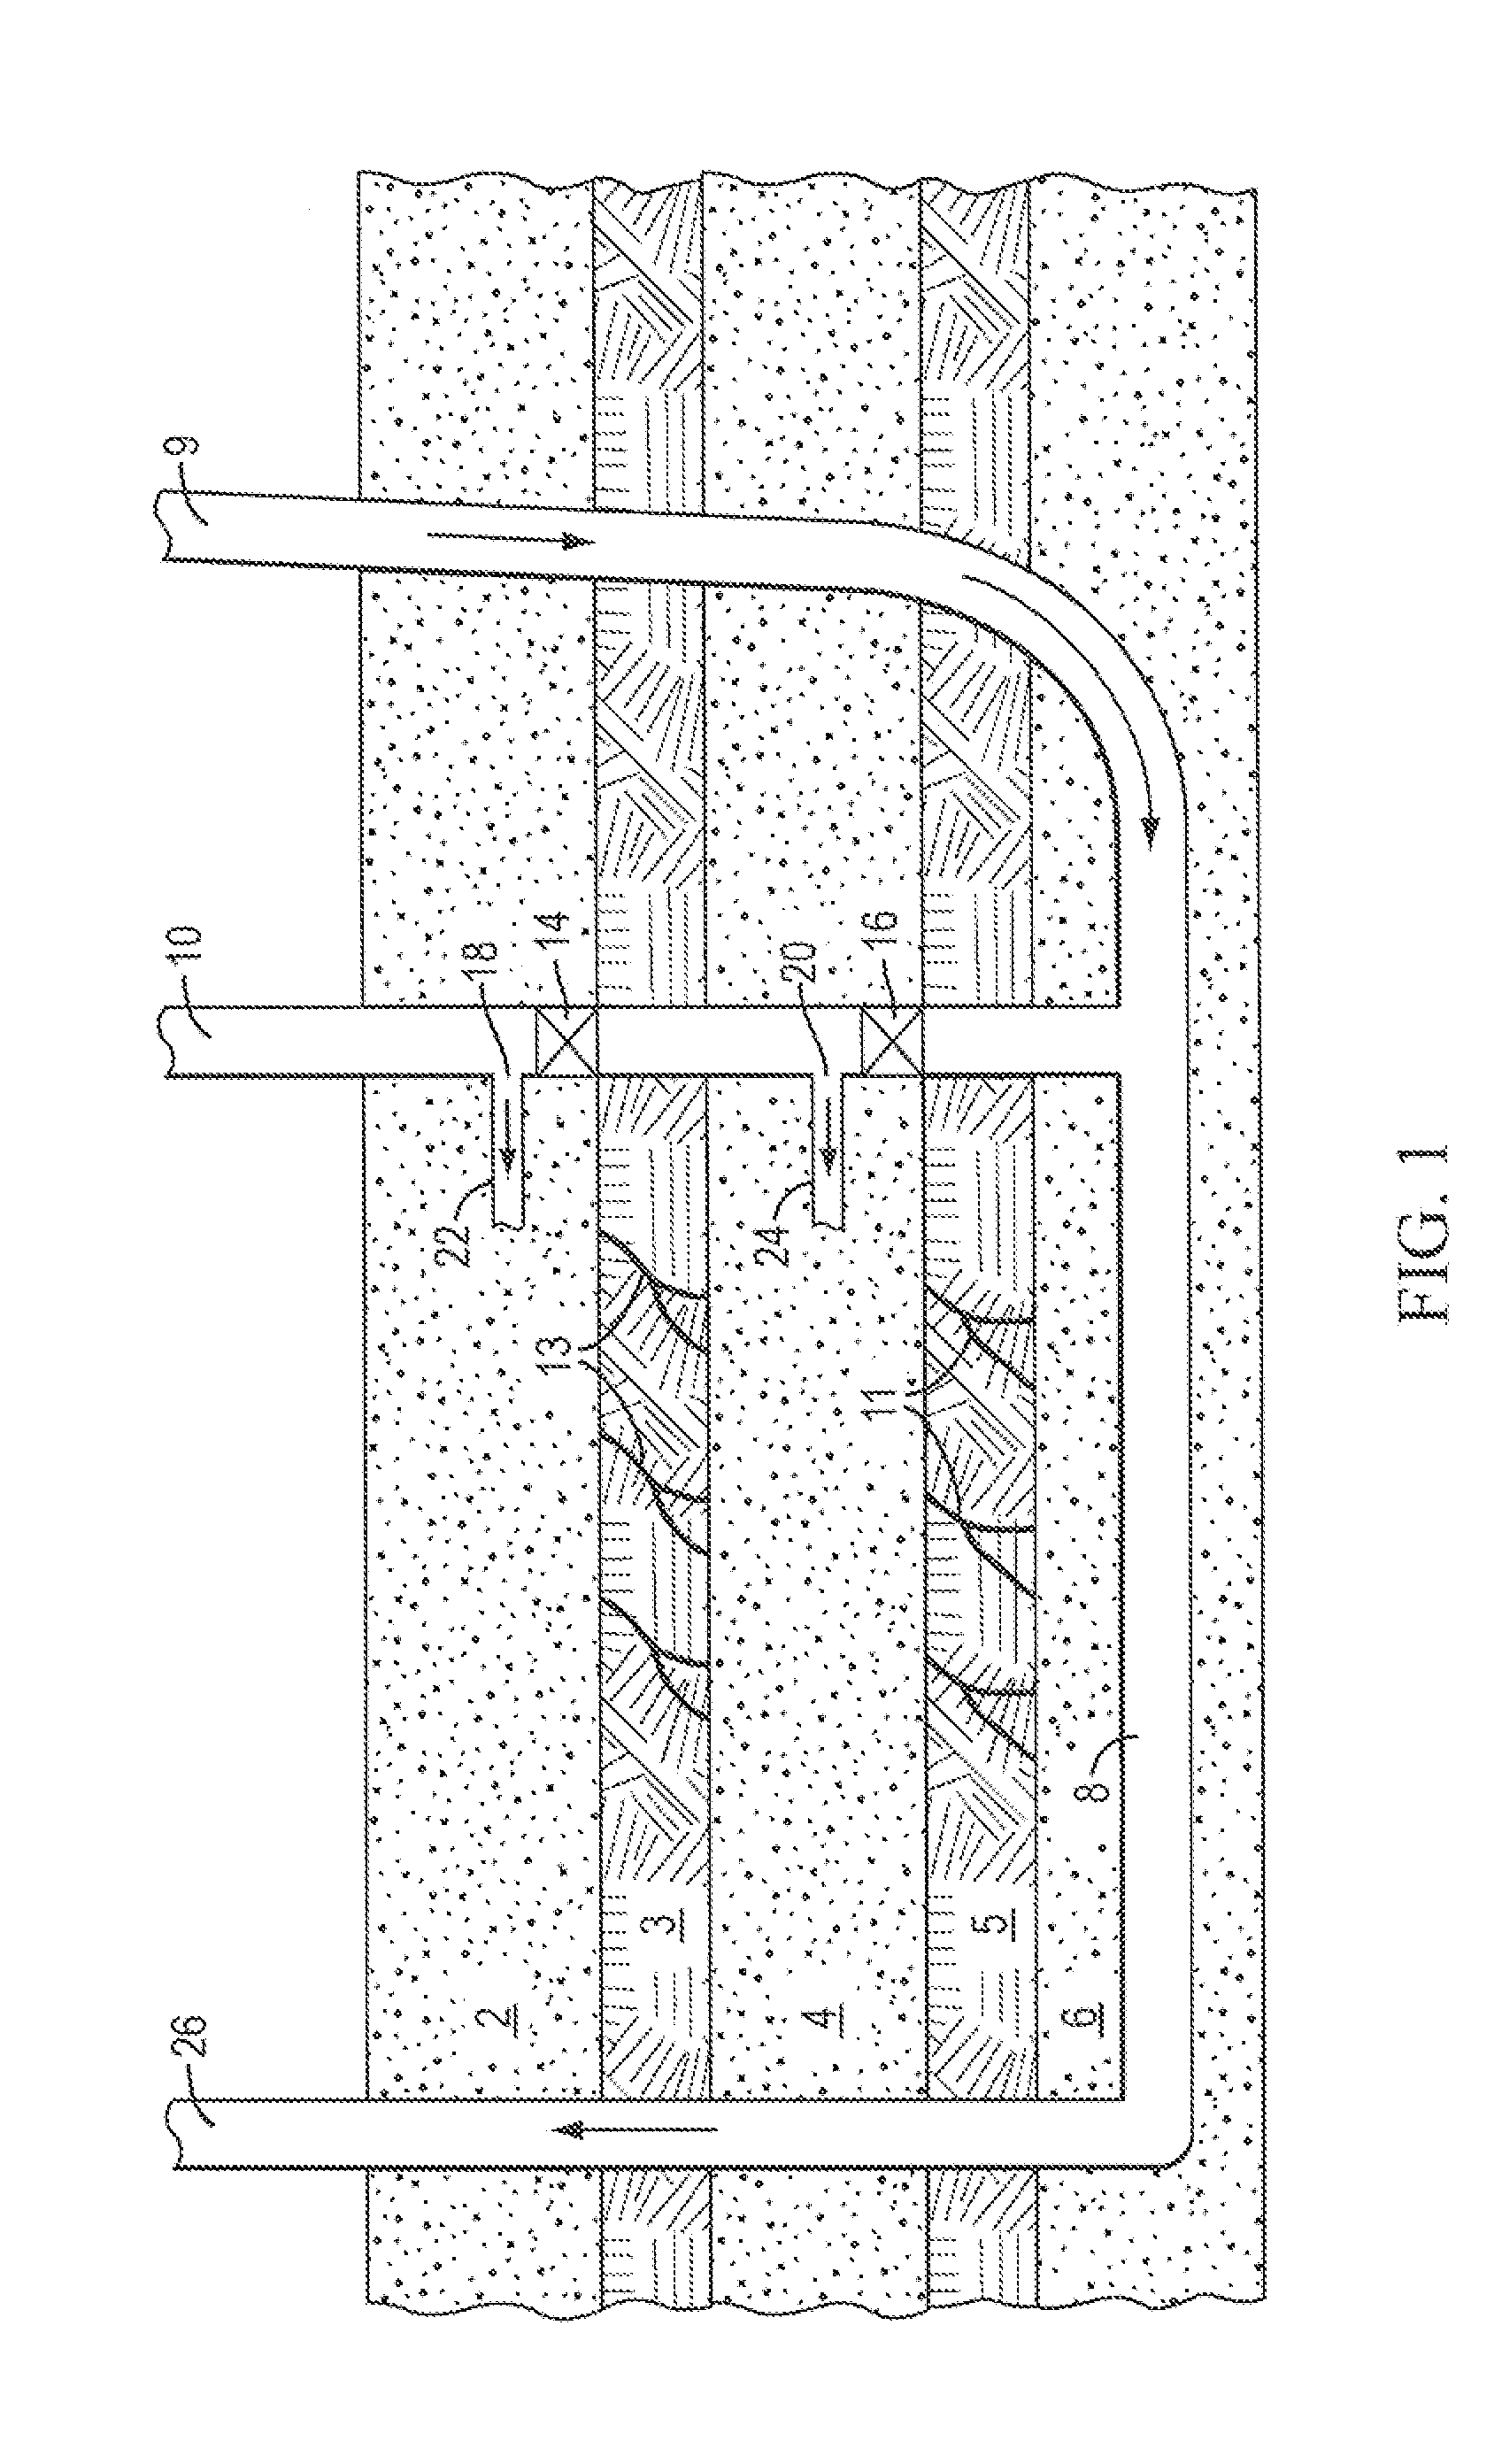 Method for Simultaneously Mining Vertically Disposed Beds